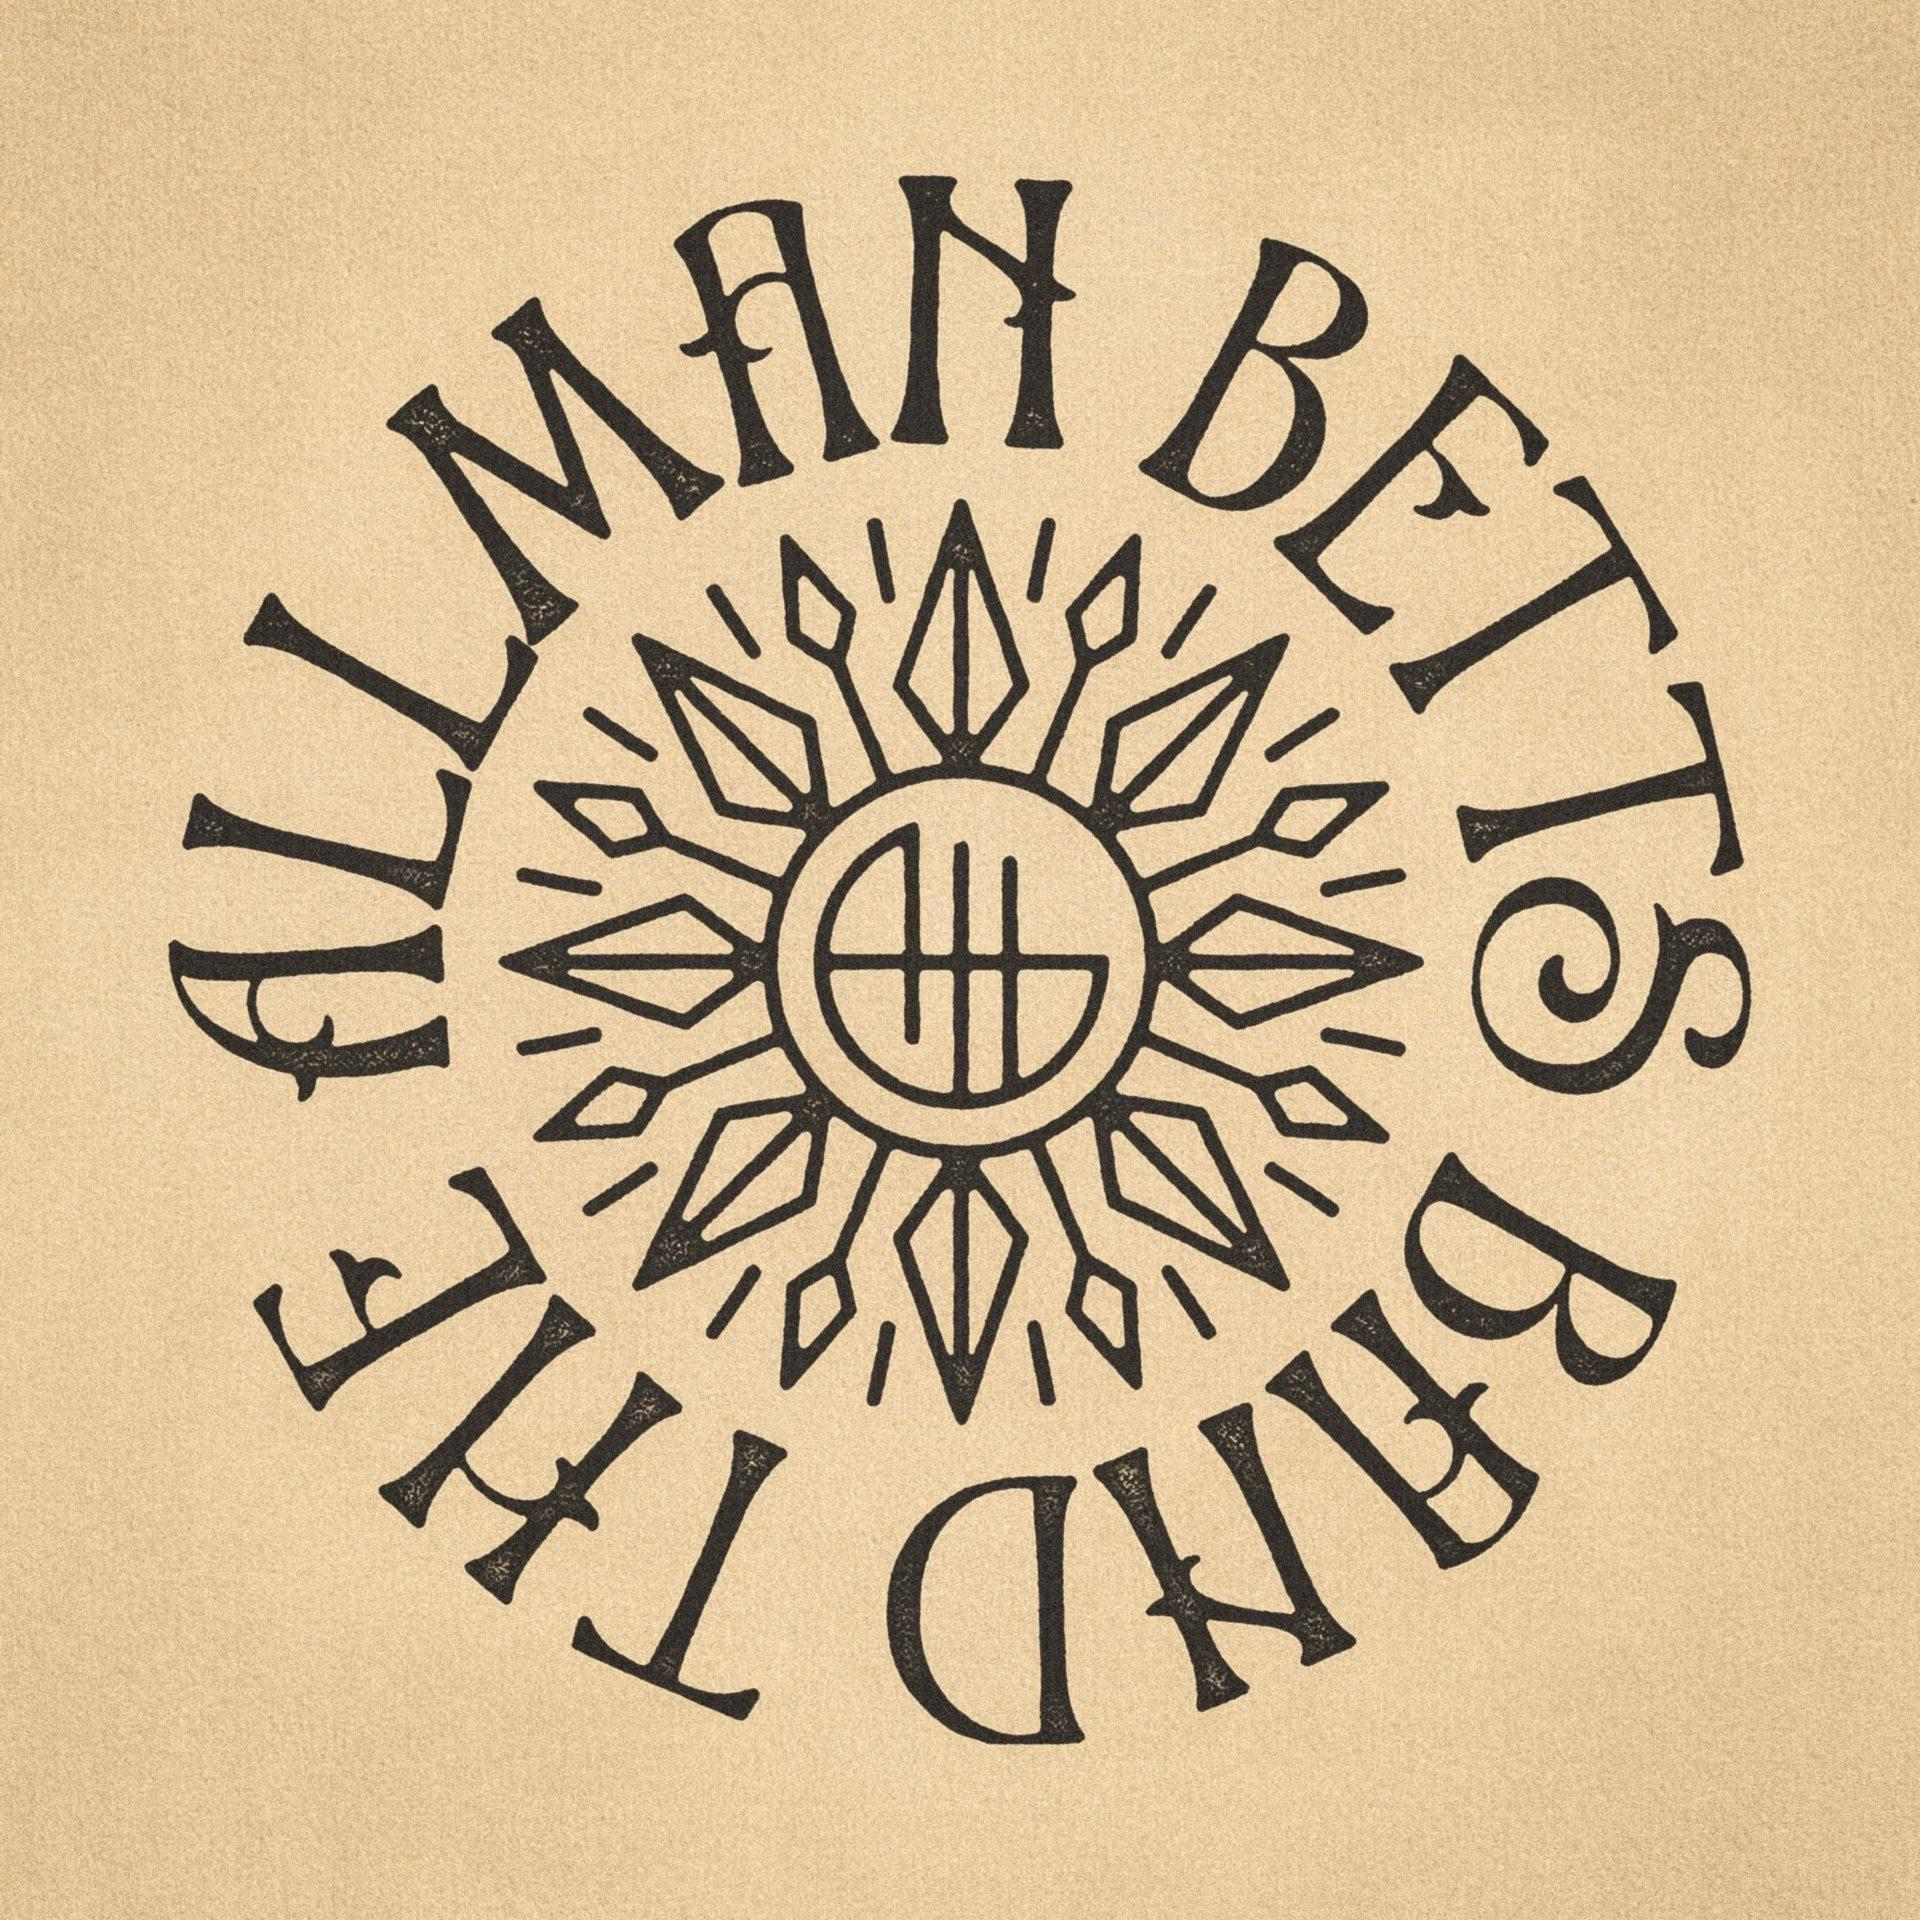 Betts TO - Allman THE DOWN - Band (CD) RIVER